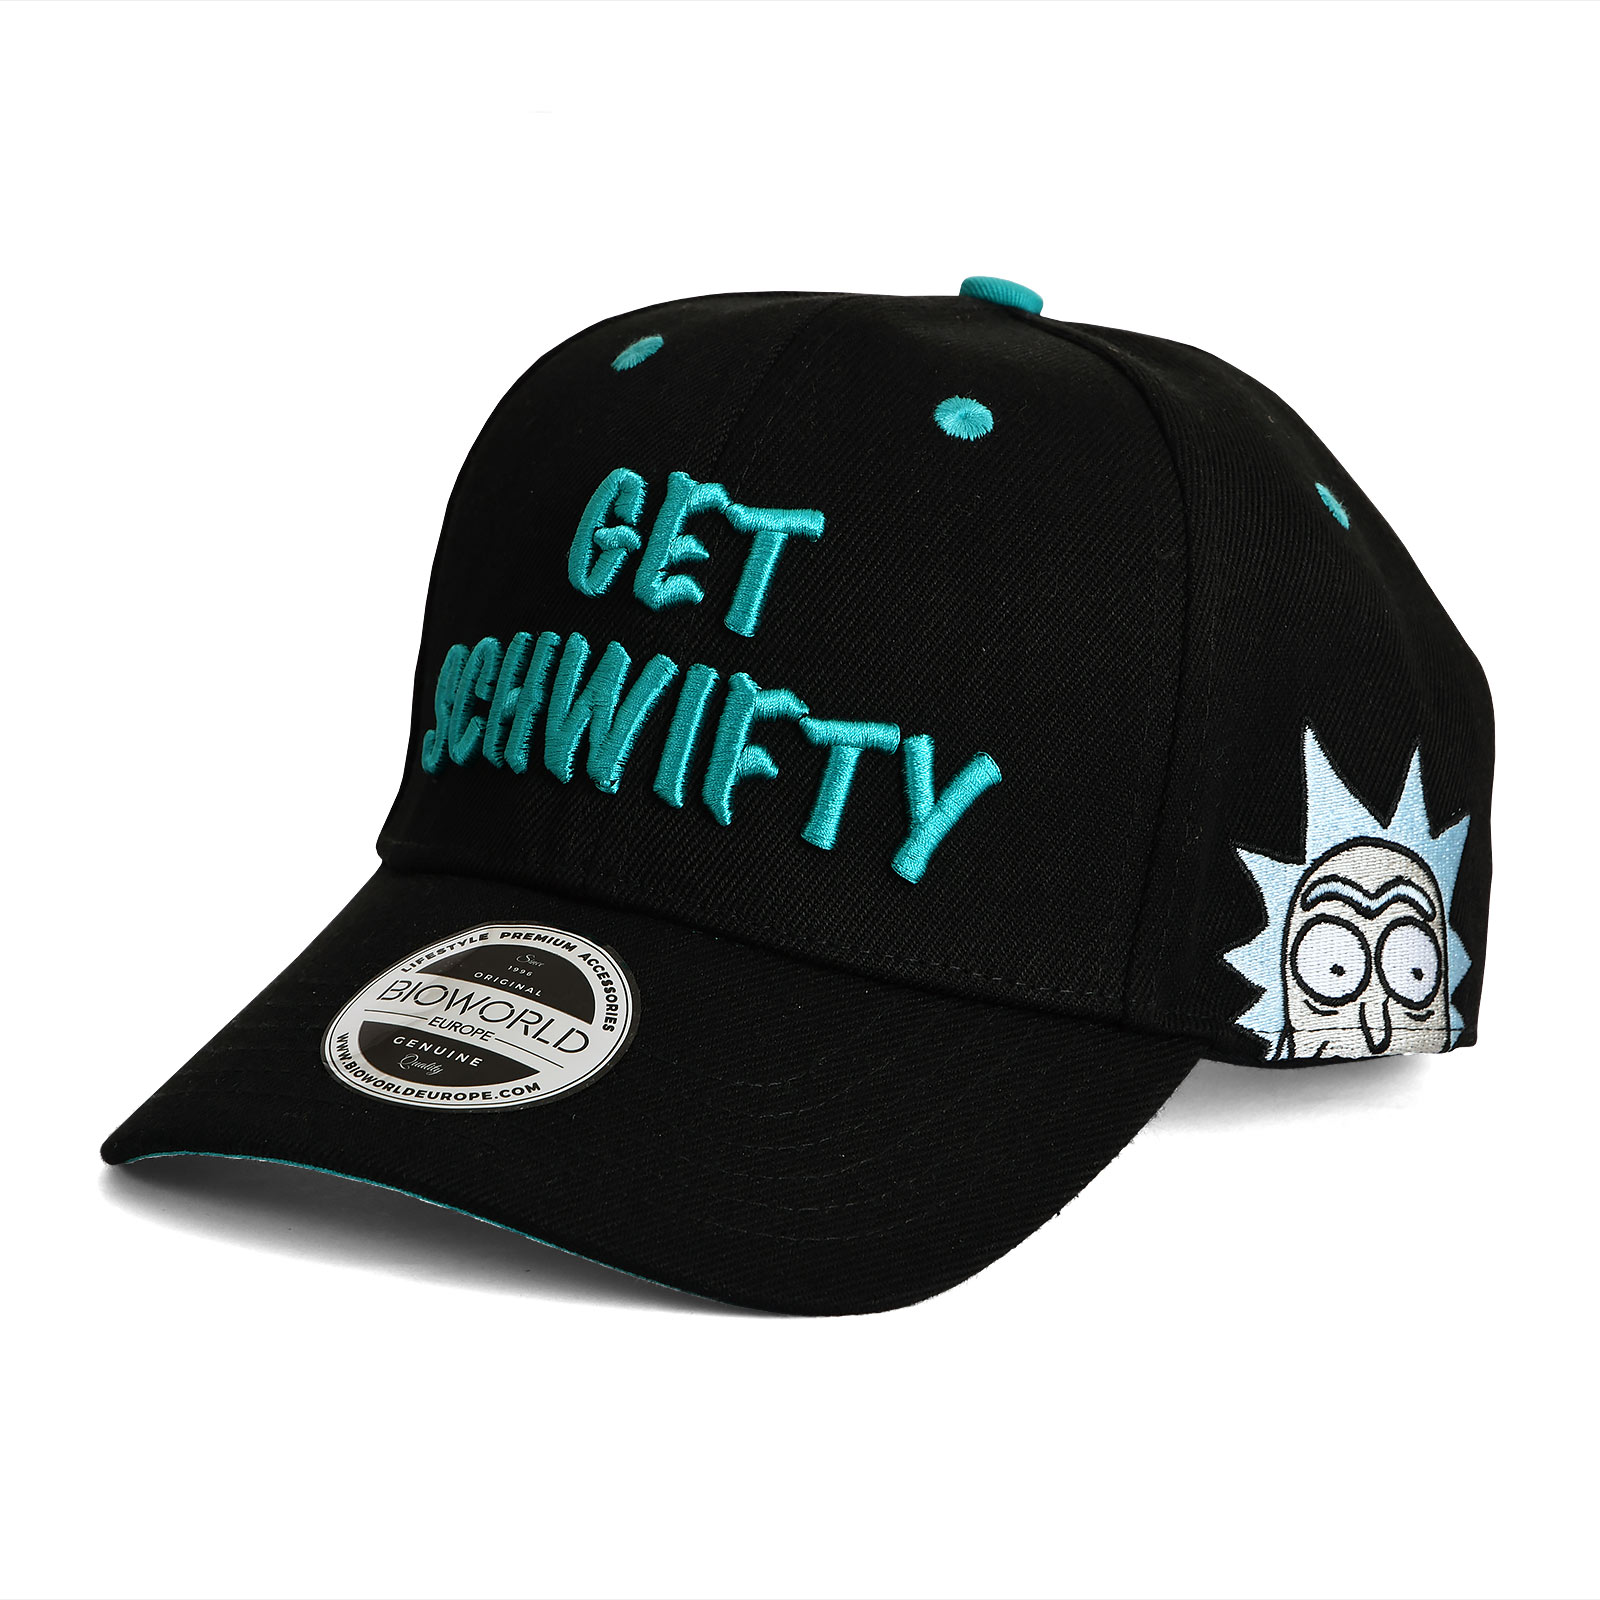 Rick and Morty - Get Schwifty Basecap schwarz